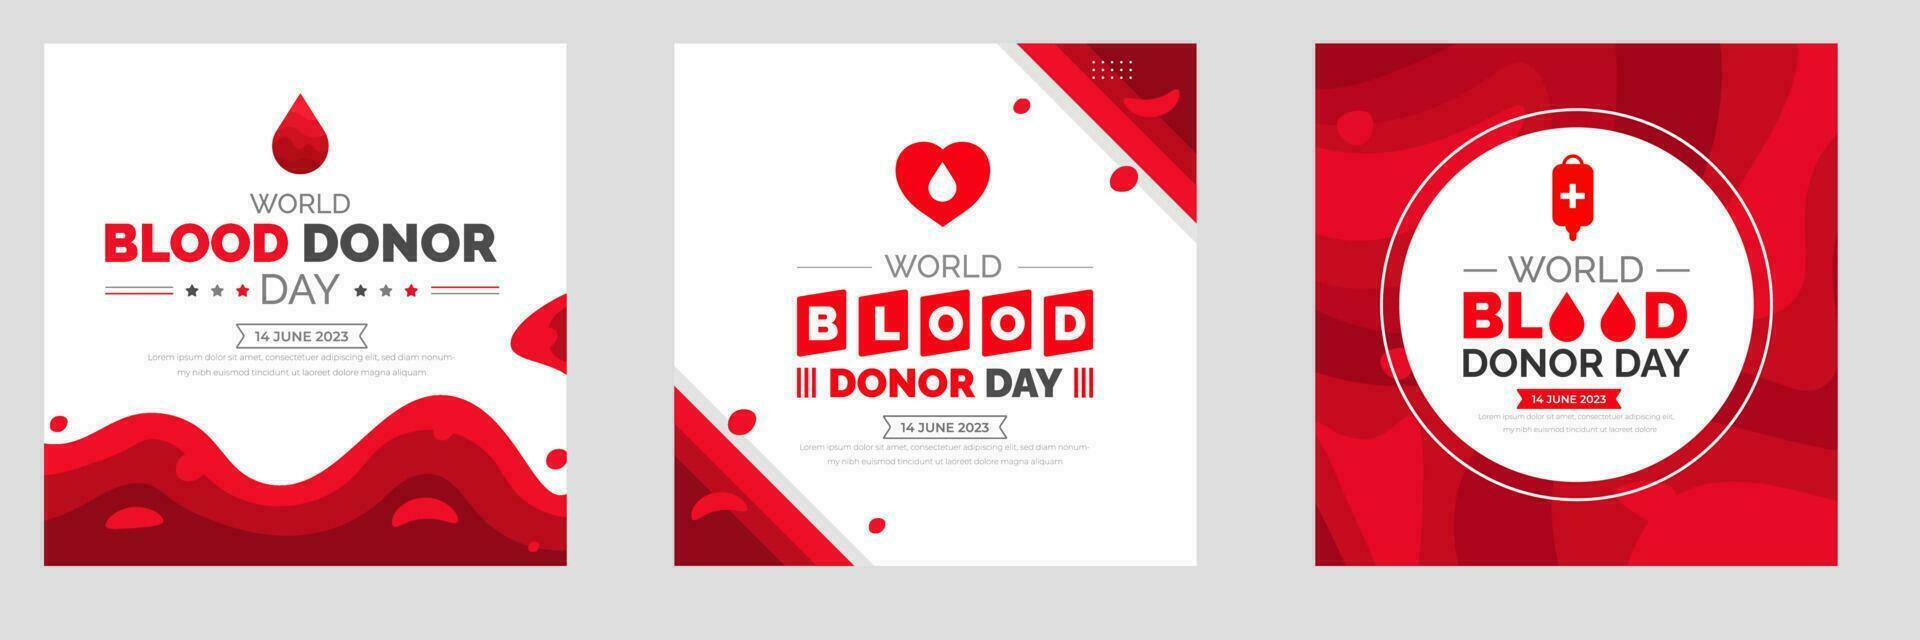 World Blood Donor Day social media post banner or typography design template set. Blood Donor Day background or banner design bundle. vector